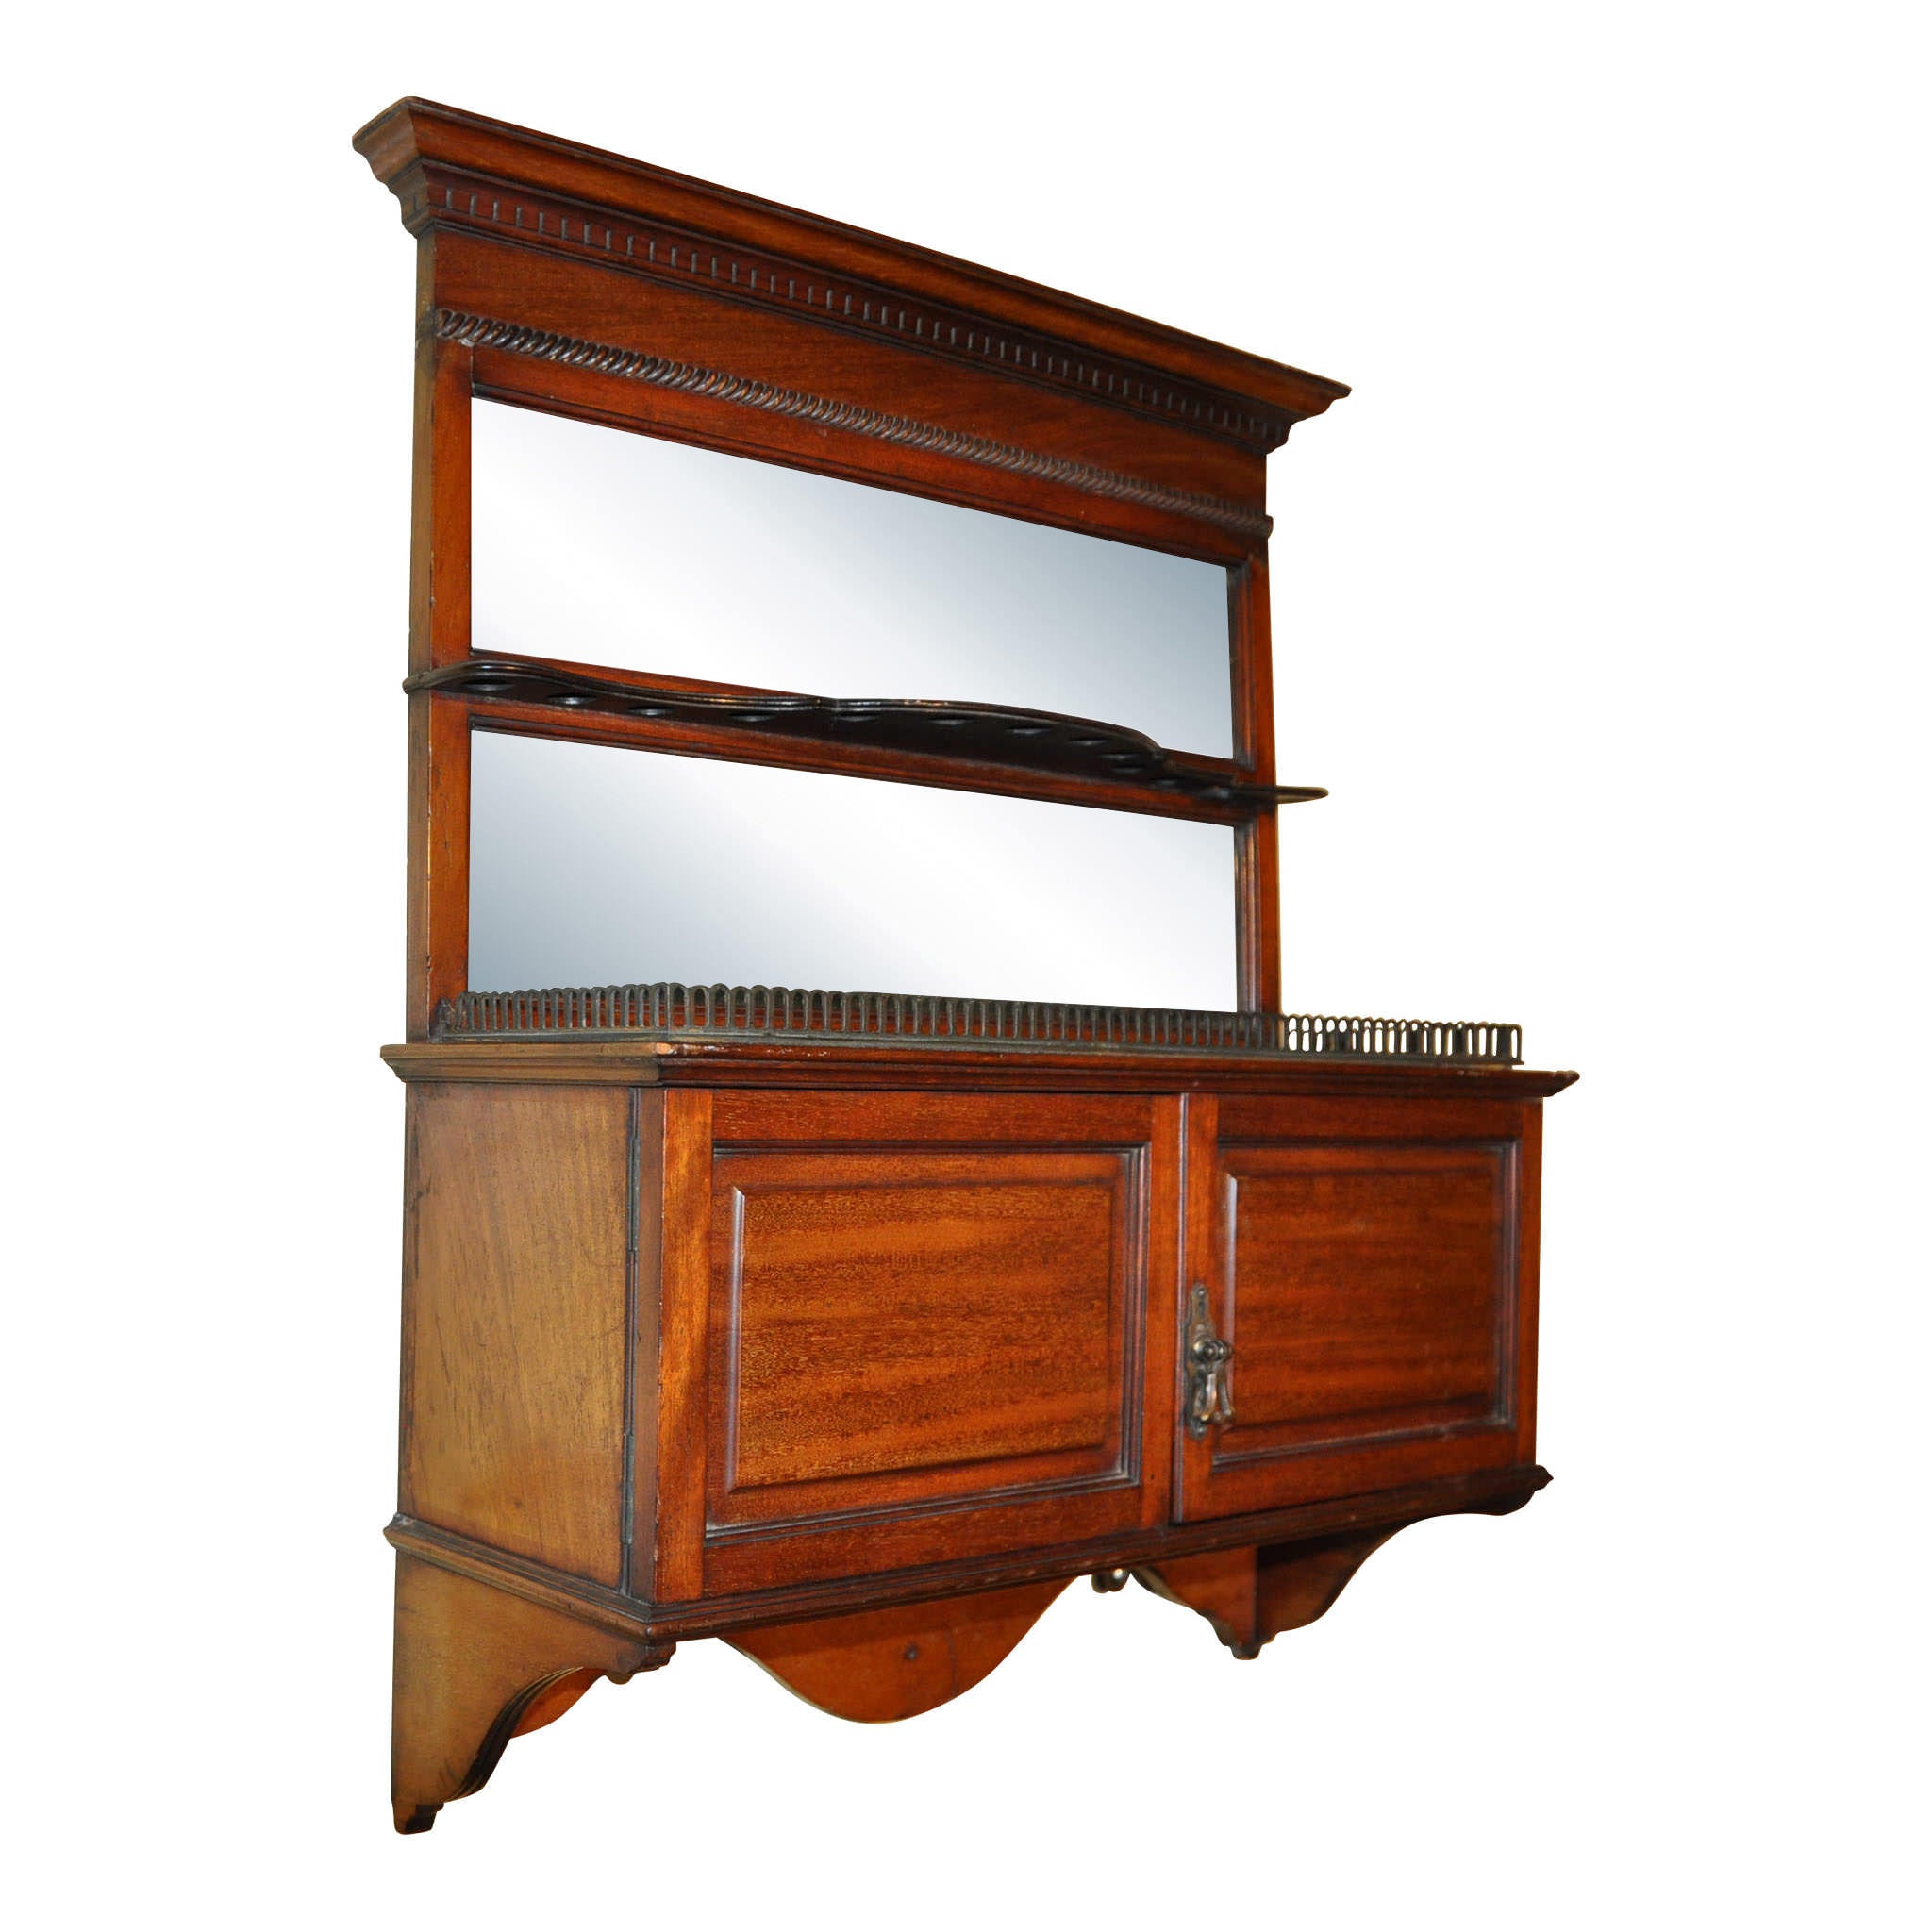 Tobacco Wall Cabinet with Pipe Rack and Mirrors